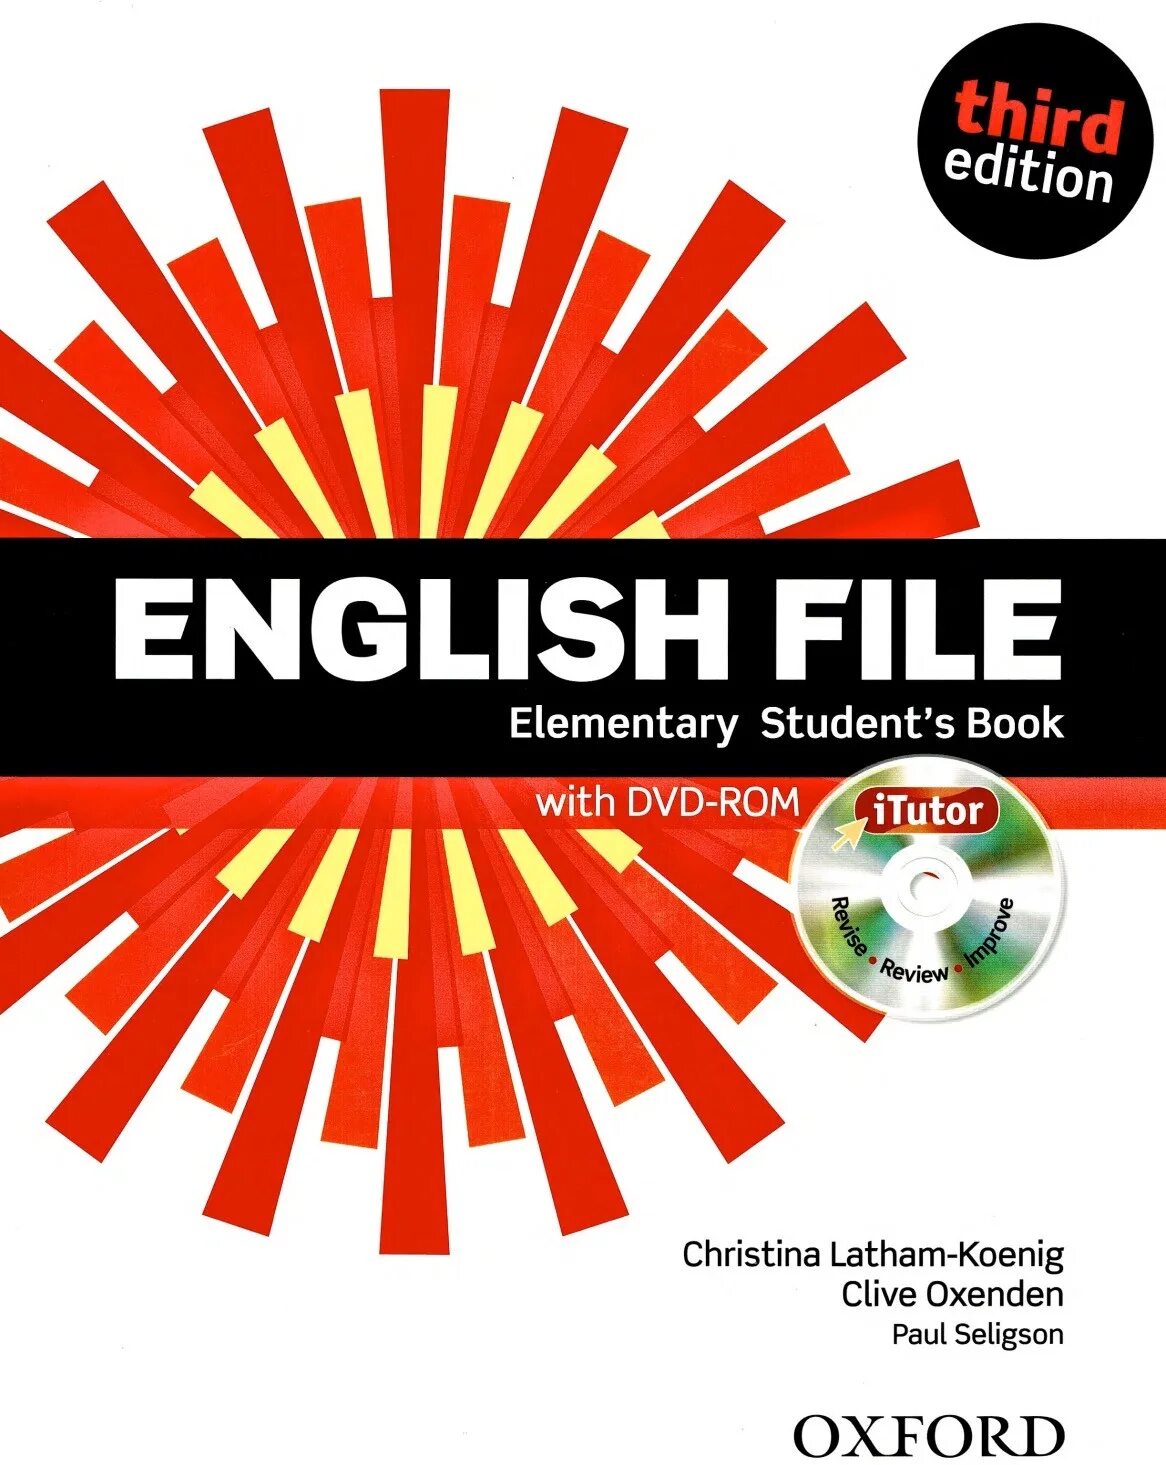 Английский Elementary third Edition. New English file Elementary. Student's book. Clive Oxenden, Christina Latham-Koenig, Paul Seligson [Oxford] (2009) ответы. New English file (Oxford) Intermediate student's book: Clive Oxenden, Christina Latham-Koenig.. Уровни English file Elementary. English file revise and check